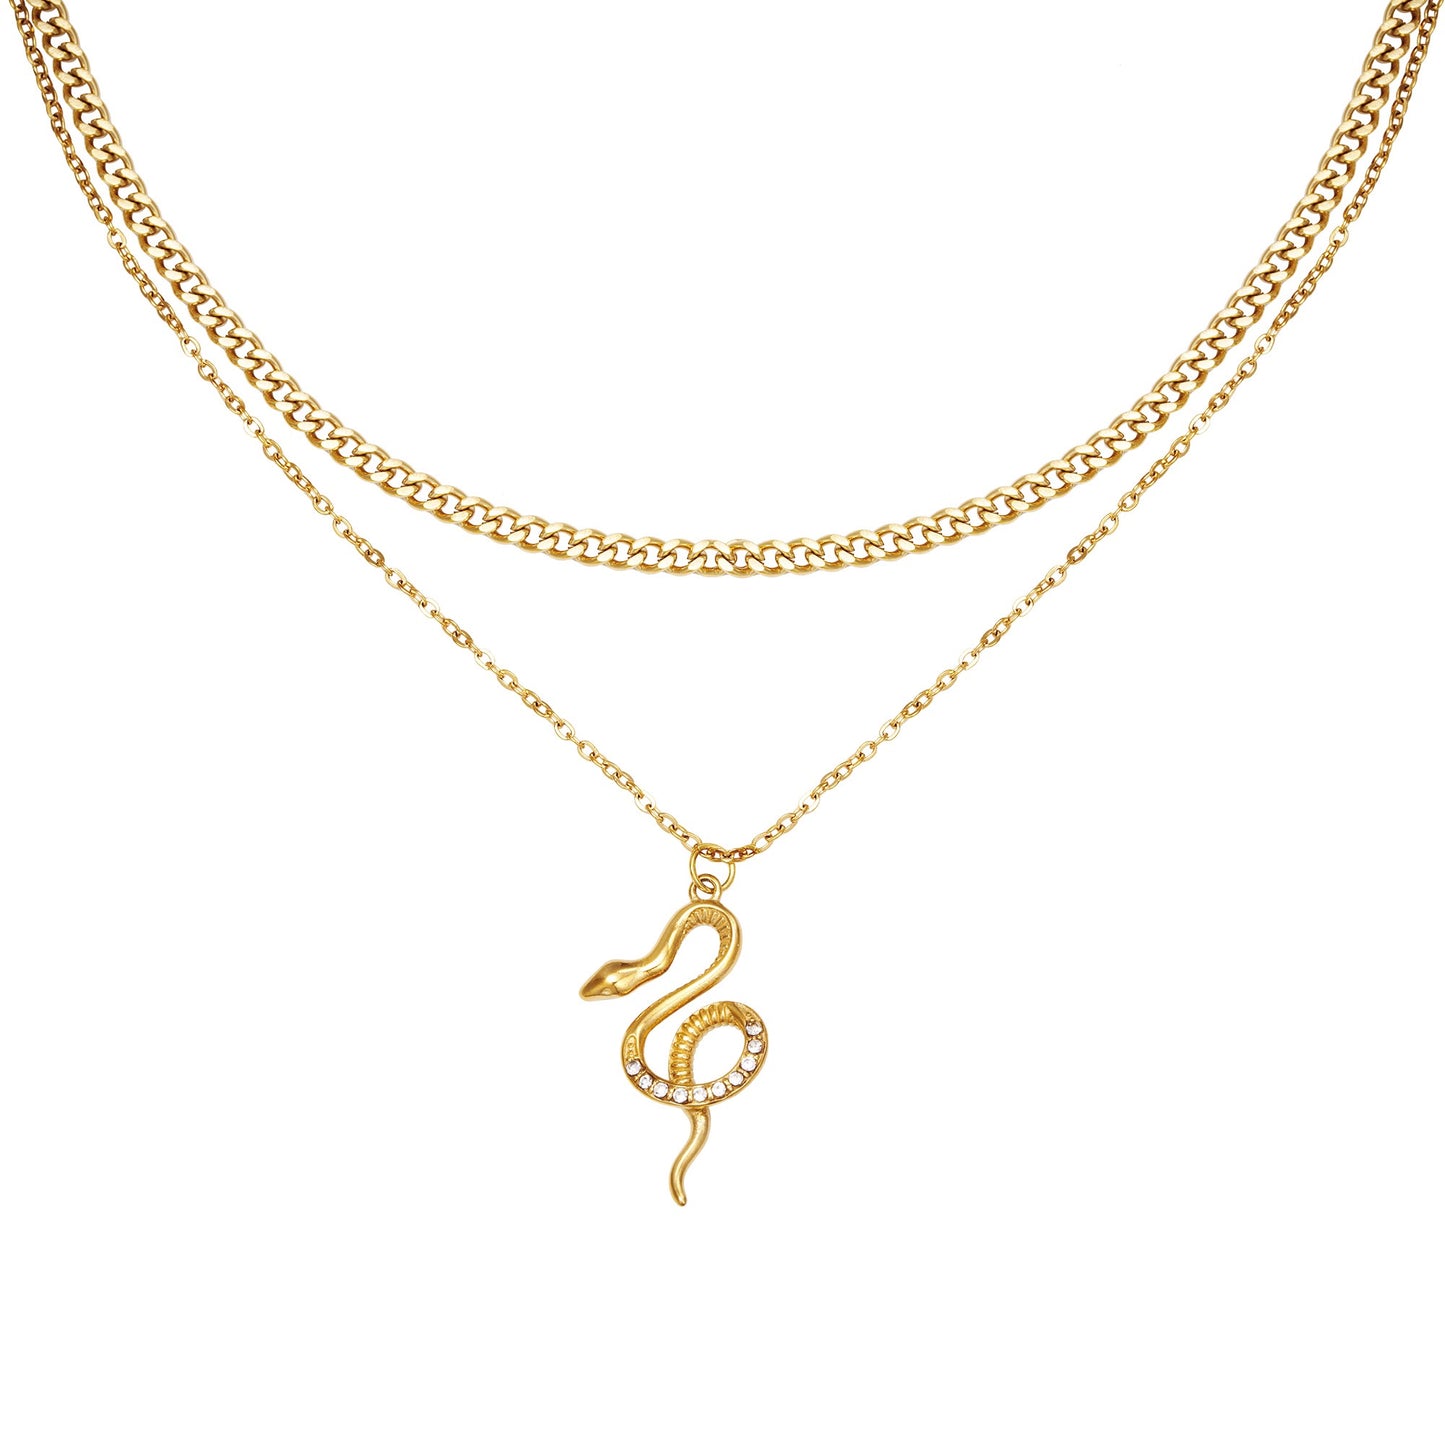 DOUBLE SNAKE NECKLACE